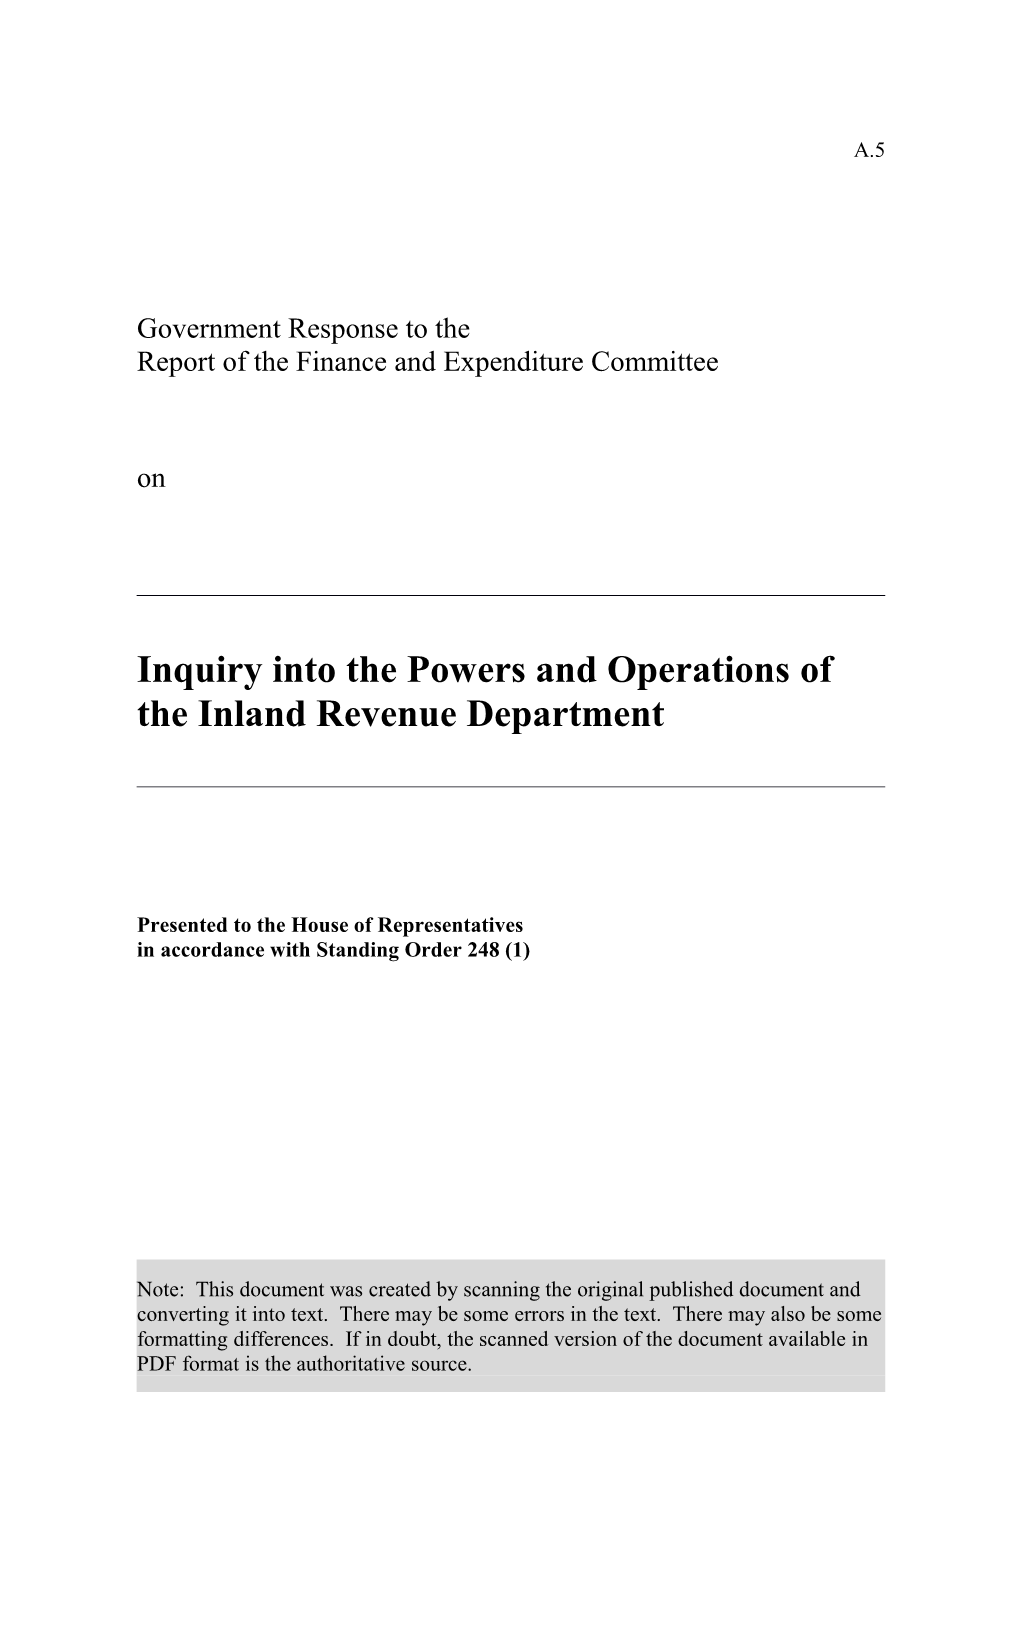 Government Response To The Report Of The Finance And Expenditure Committee On The Inquiry Into The Powers And Operations Of The Inland Revenue Department (May 2000)